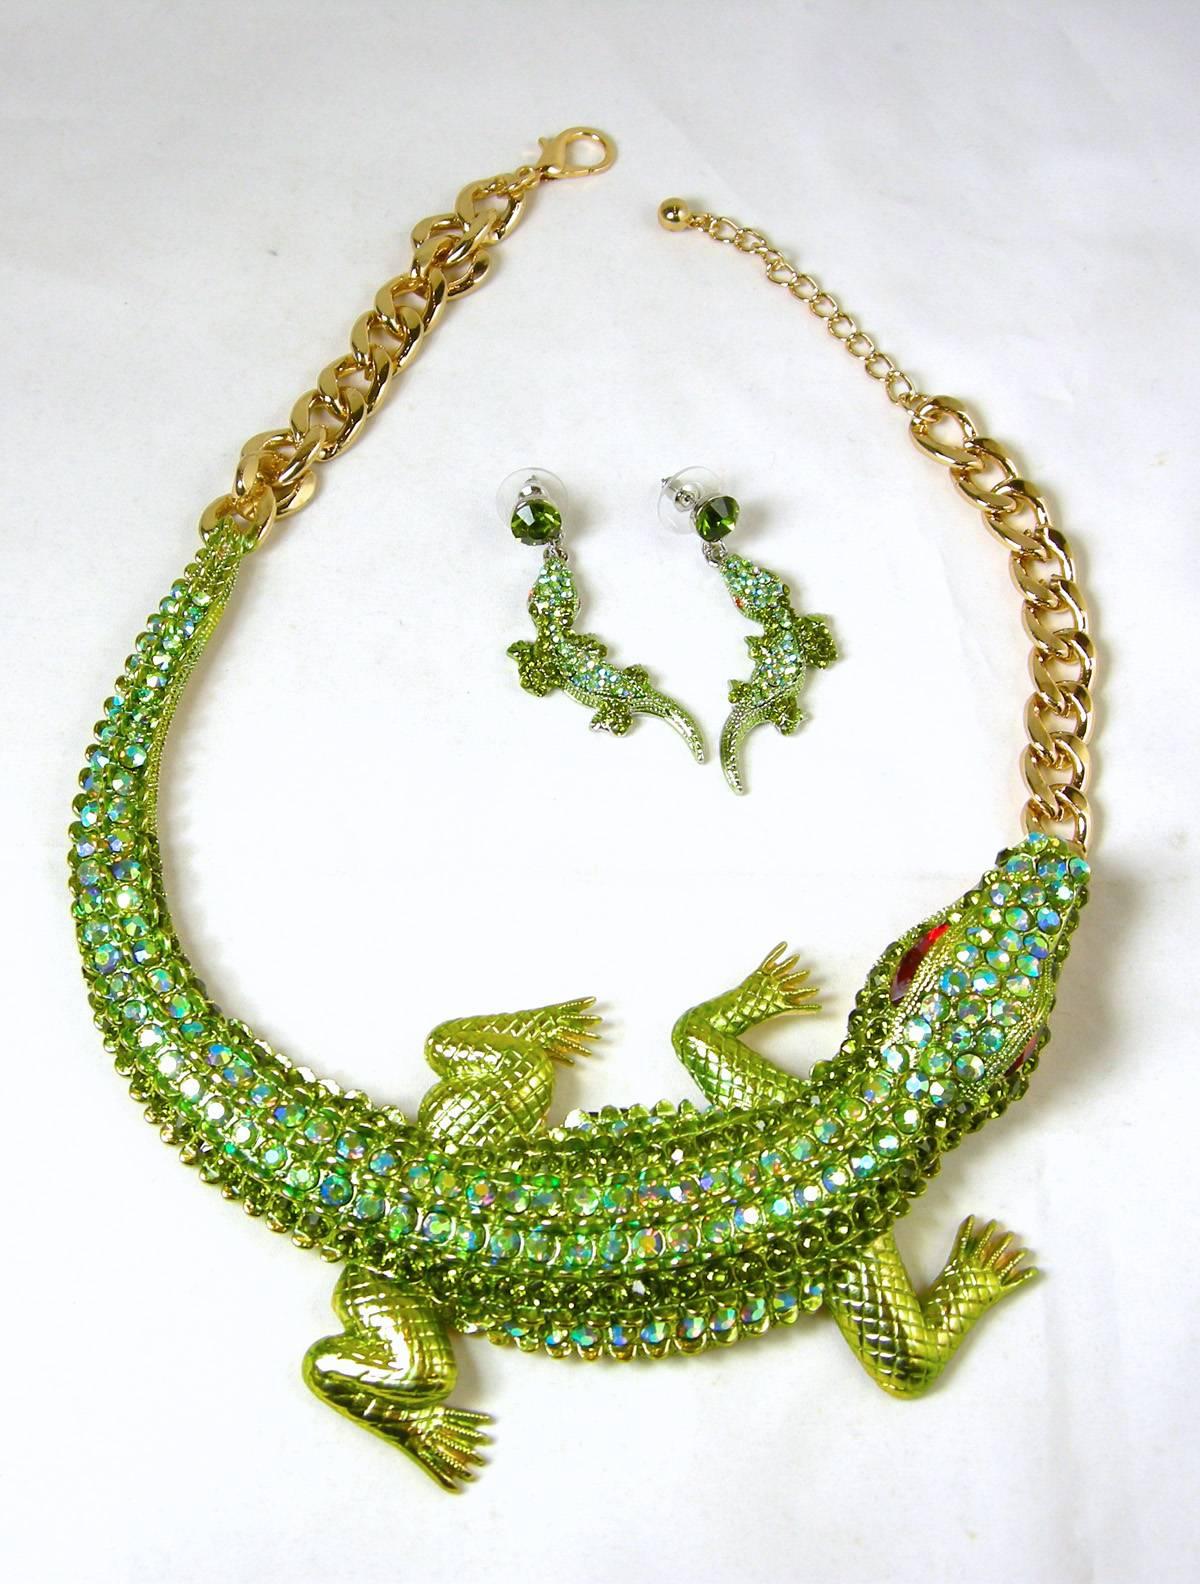 This necklace set will be the center of attention.  The Alligator is encrusted with different shades of green rhinestones as well as green Aurora Borealis to make it glow even more.  Its eyes are red rhinestones and its legs are neon green enamel